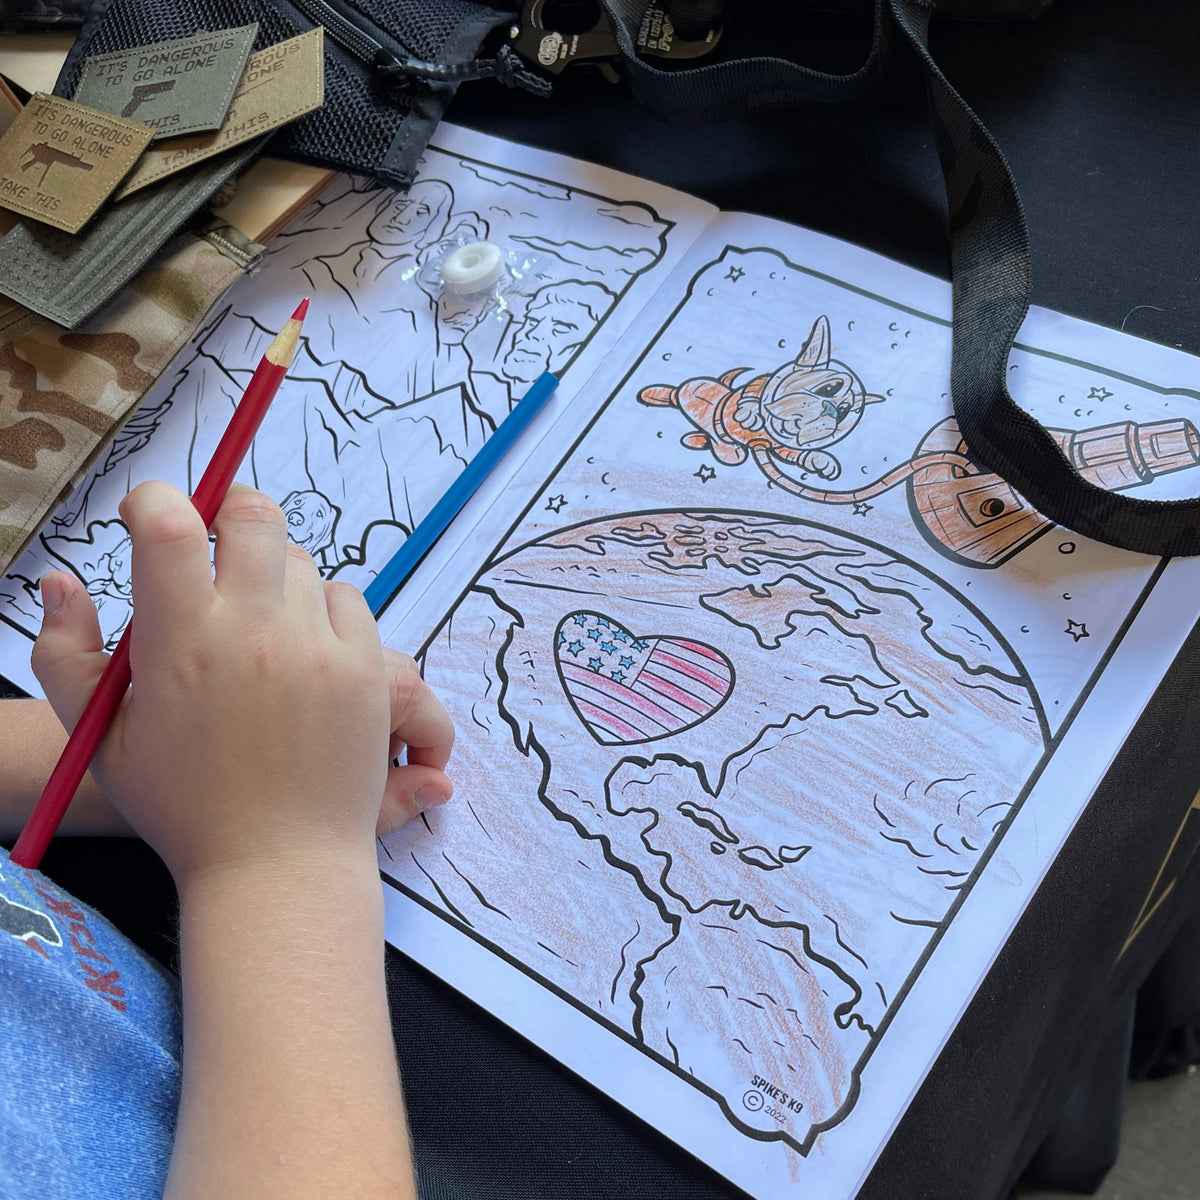 Red, White, and DEW! Coloring Book